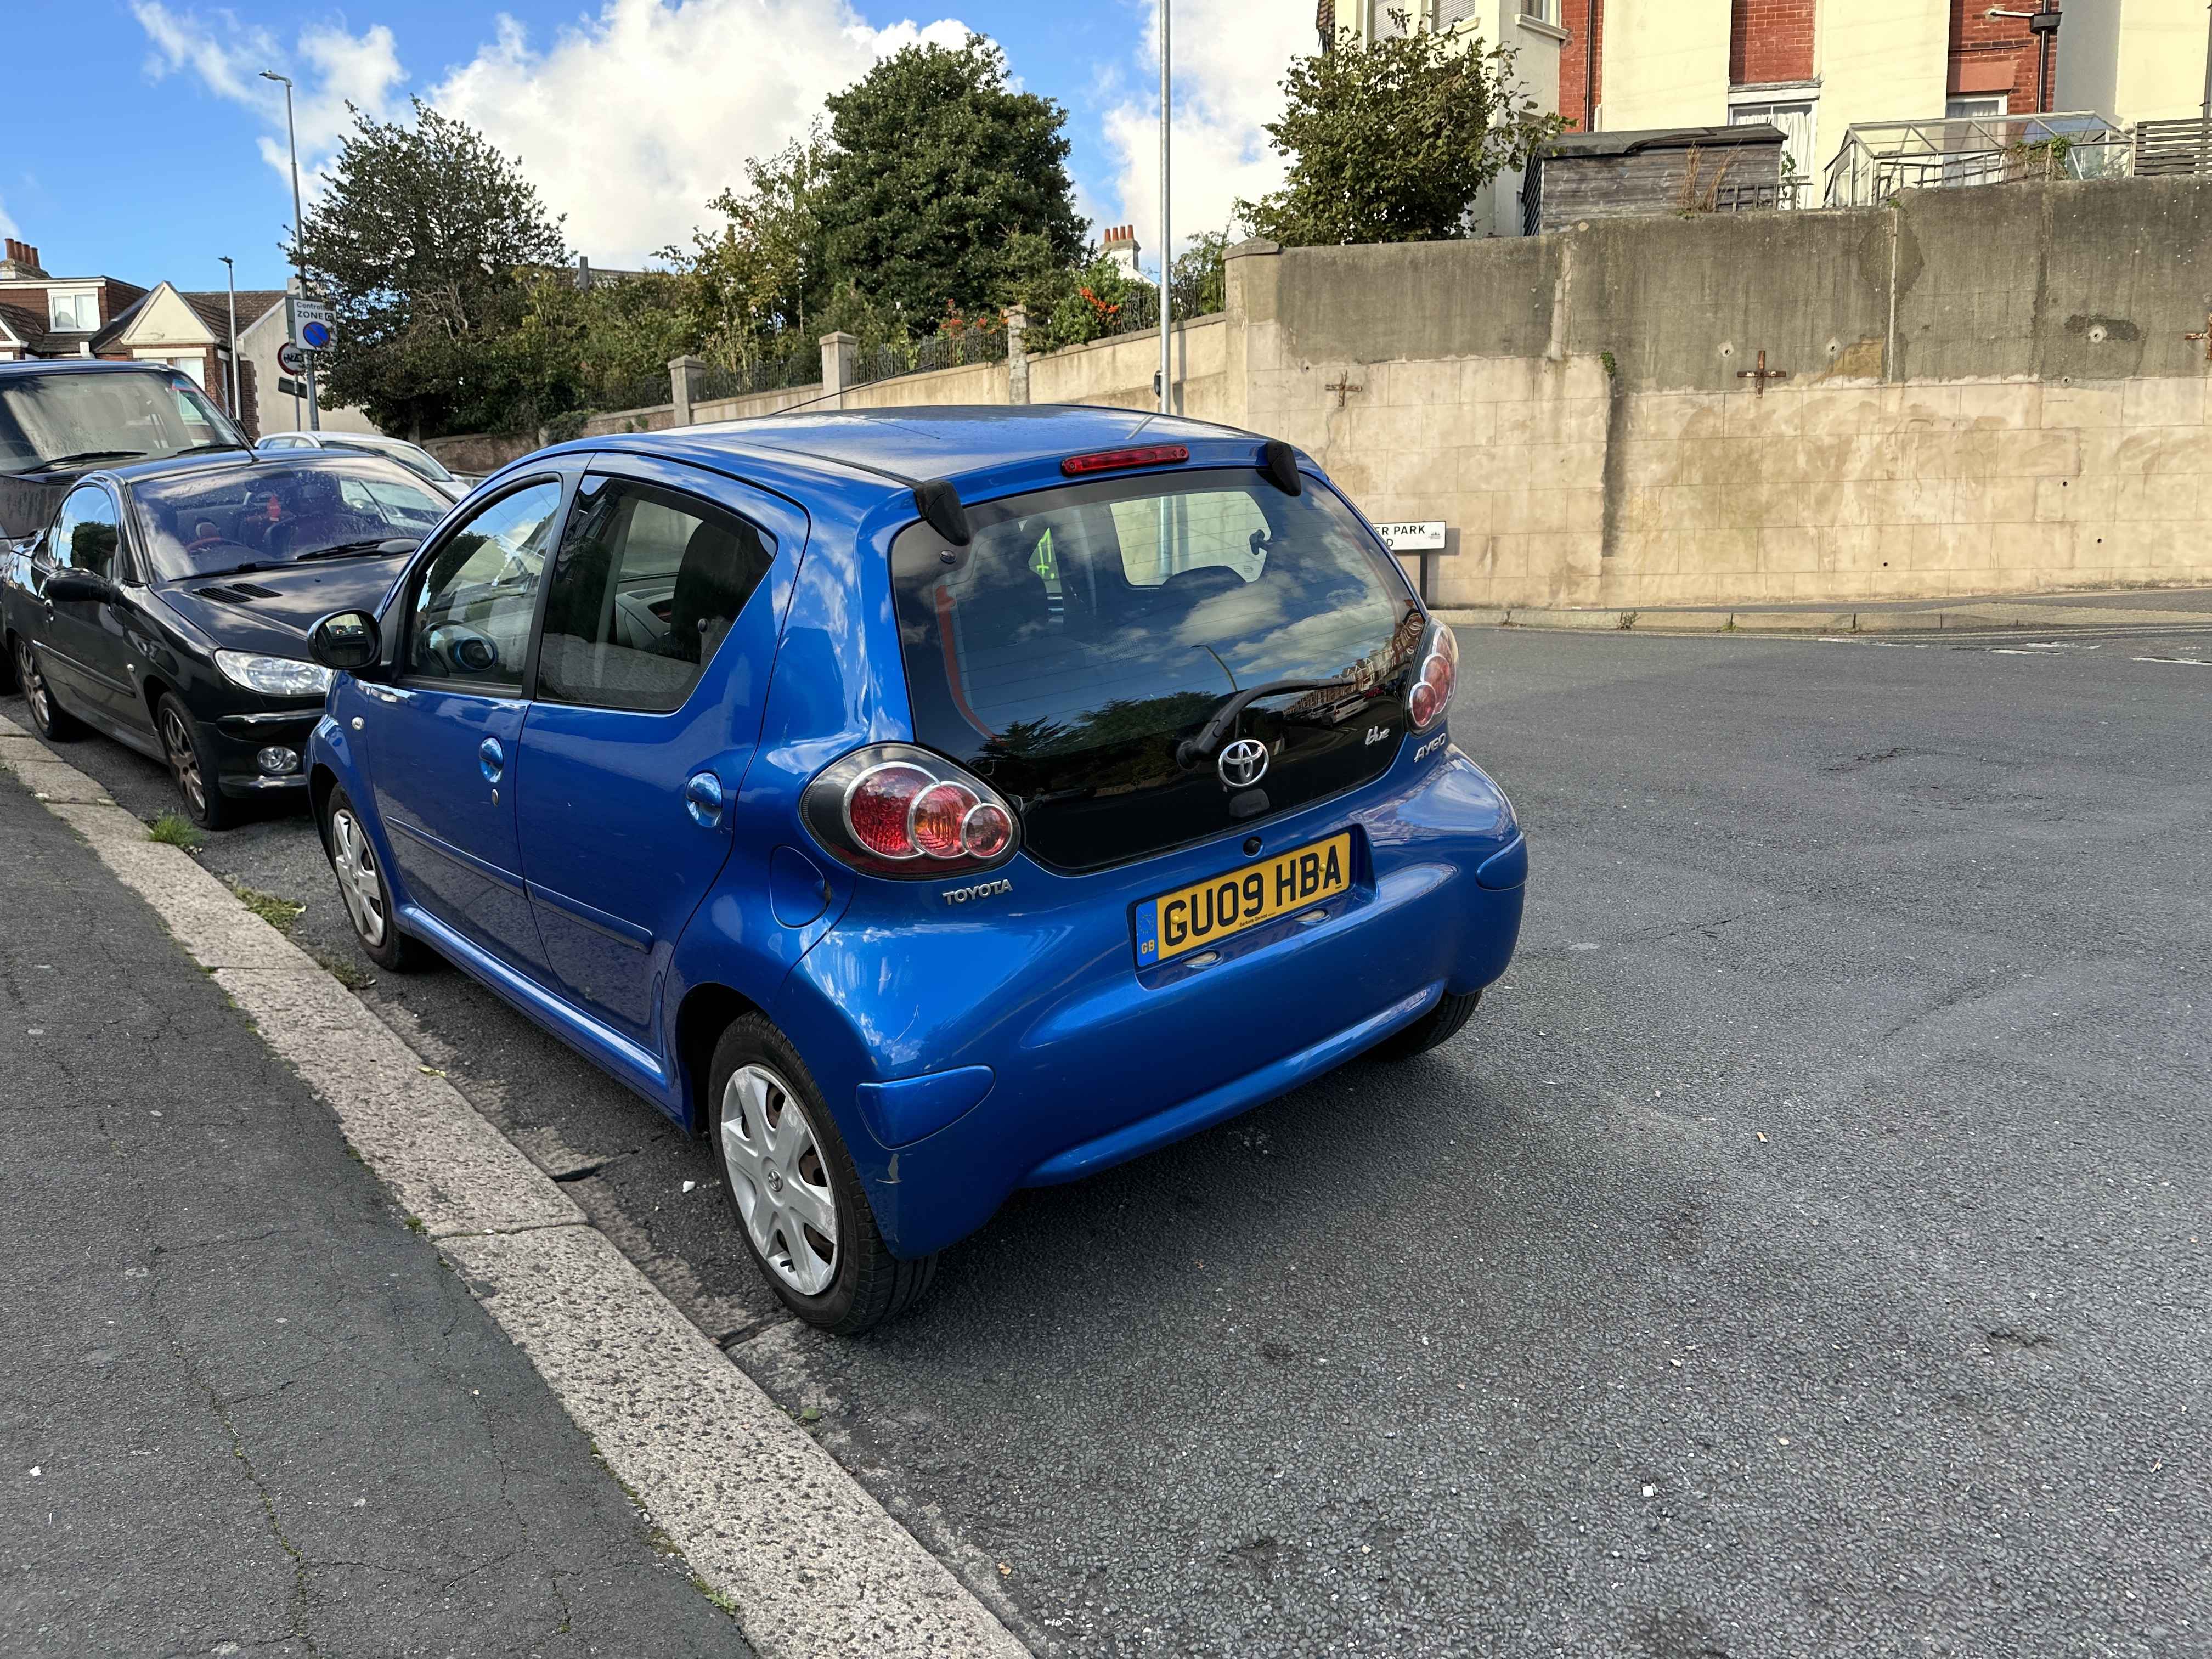 Photograph of GU09 HBA - a Blue Toyota Aygo parked in Hollingdean by a non-resident who uses the local area as part of their Brighton commute. The third of four photographs supplied by the residents of Hollingdean.